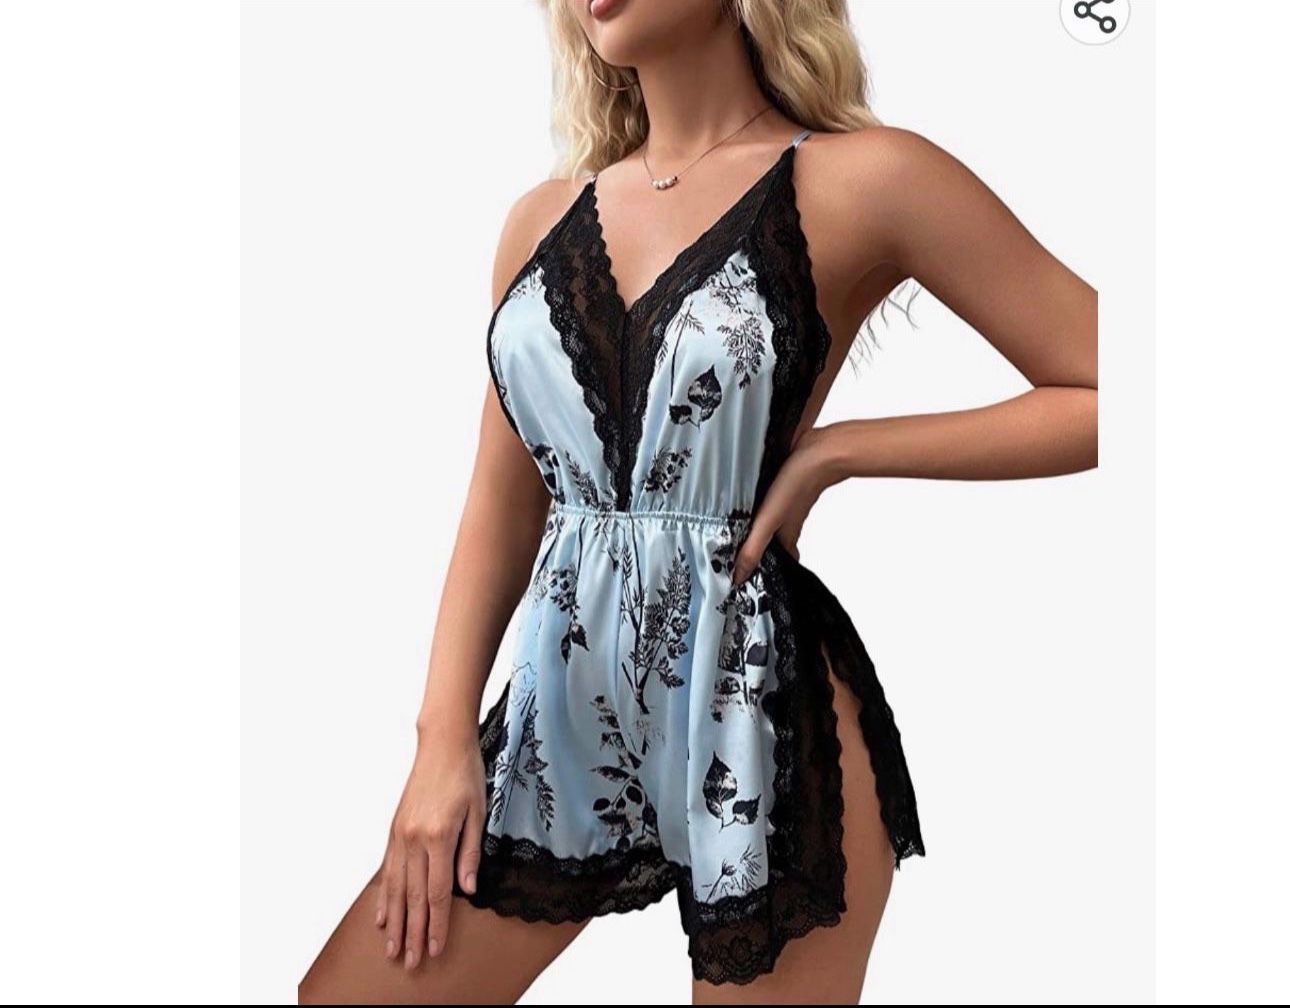 Floral Print Nightgown Romper with Lace Trim, High Cut Lingerie